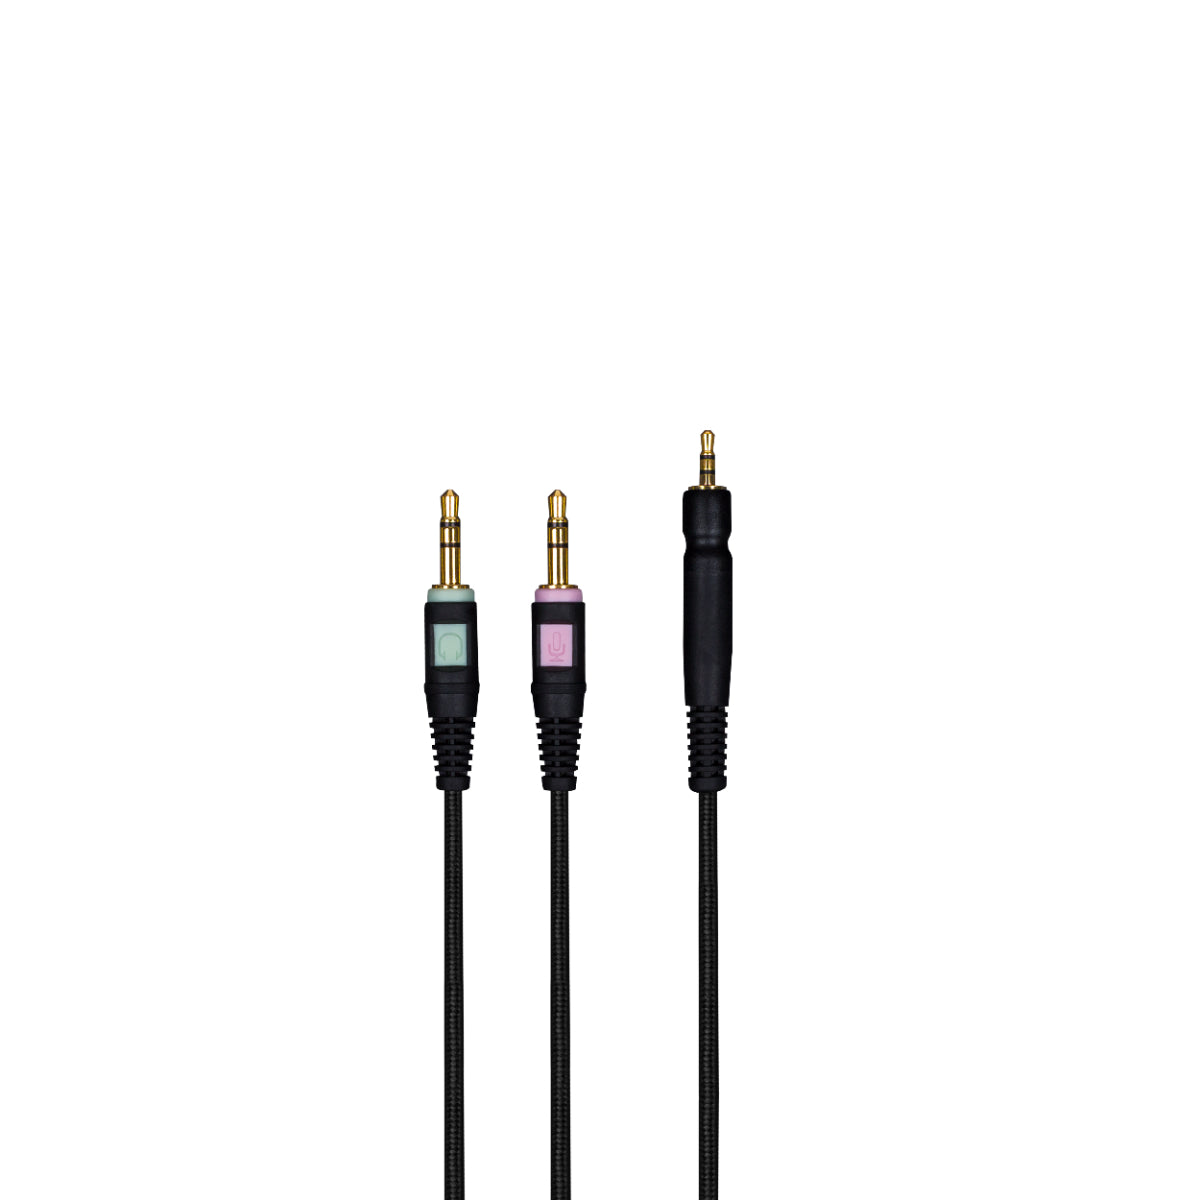 EPOS UNP PC Cable, Unpluggable Cable for GAME ZERO/ONE, 3m with PC 2x 3.5mm Jack Plug